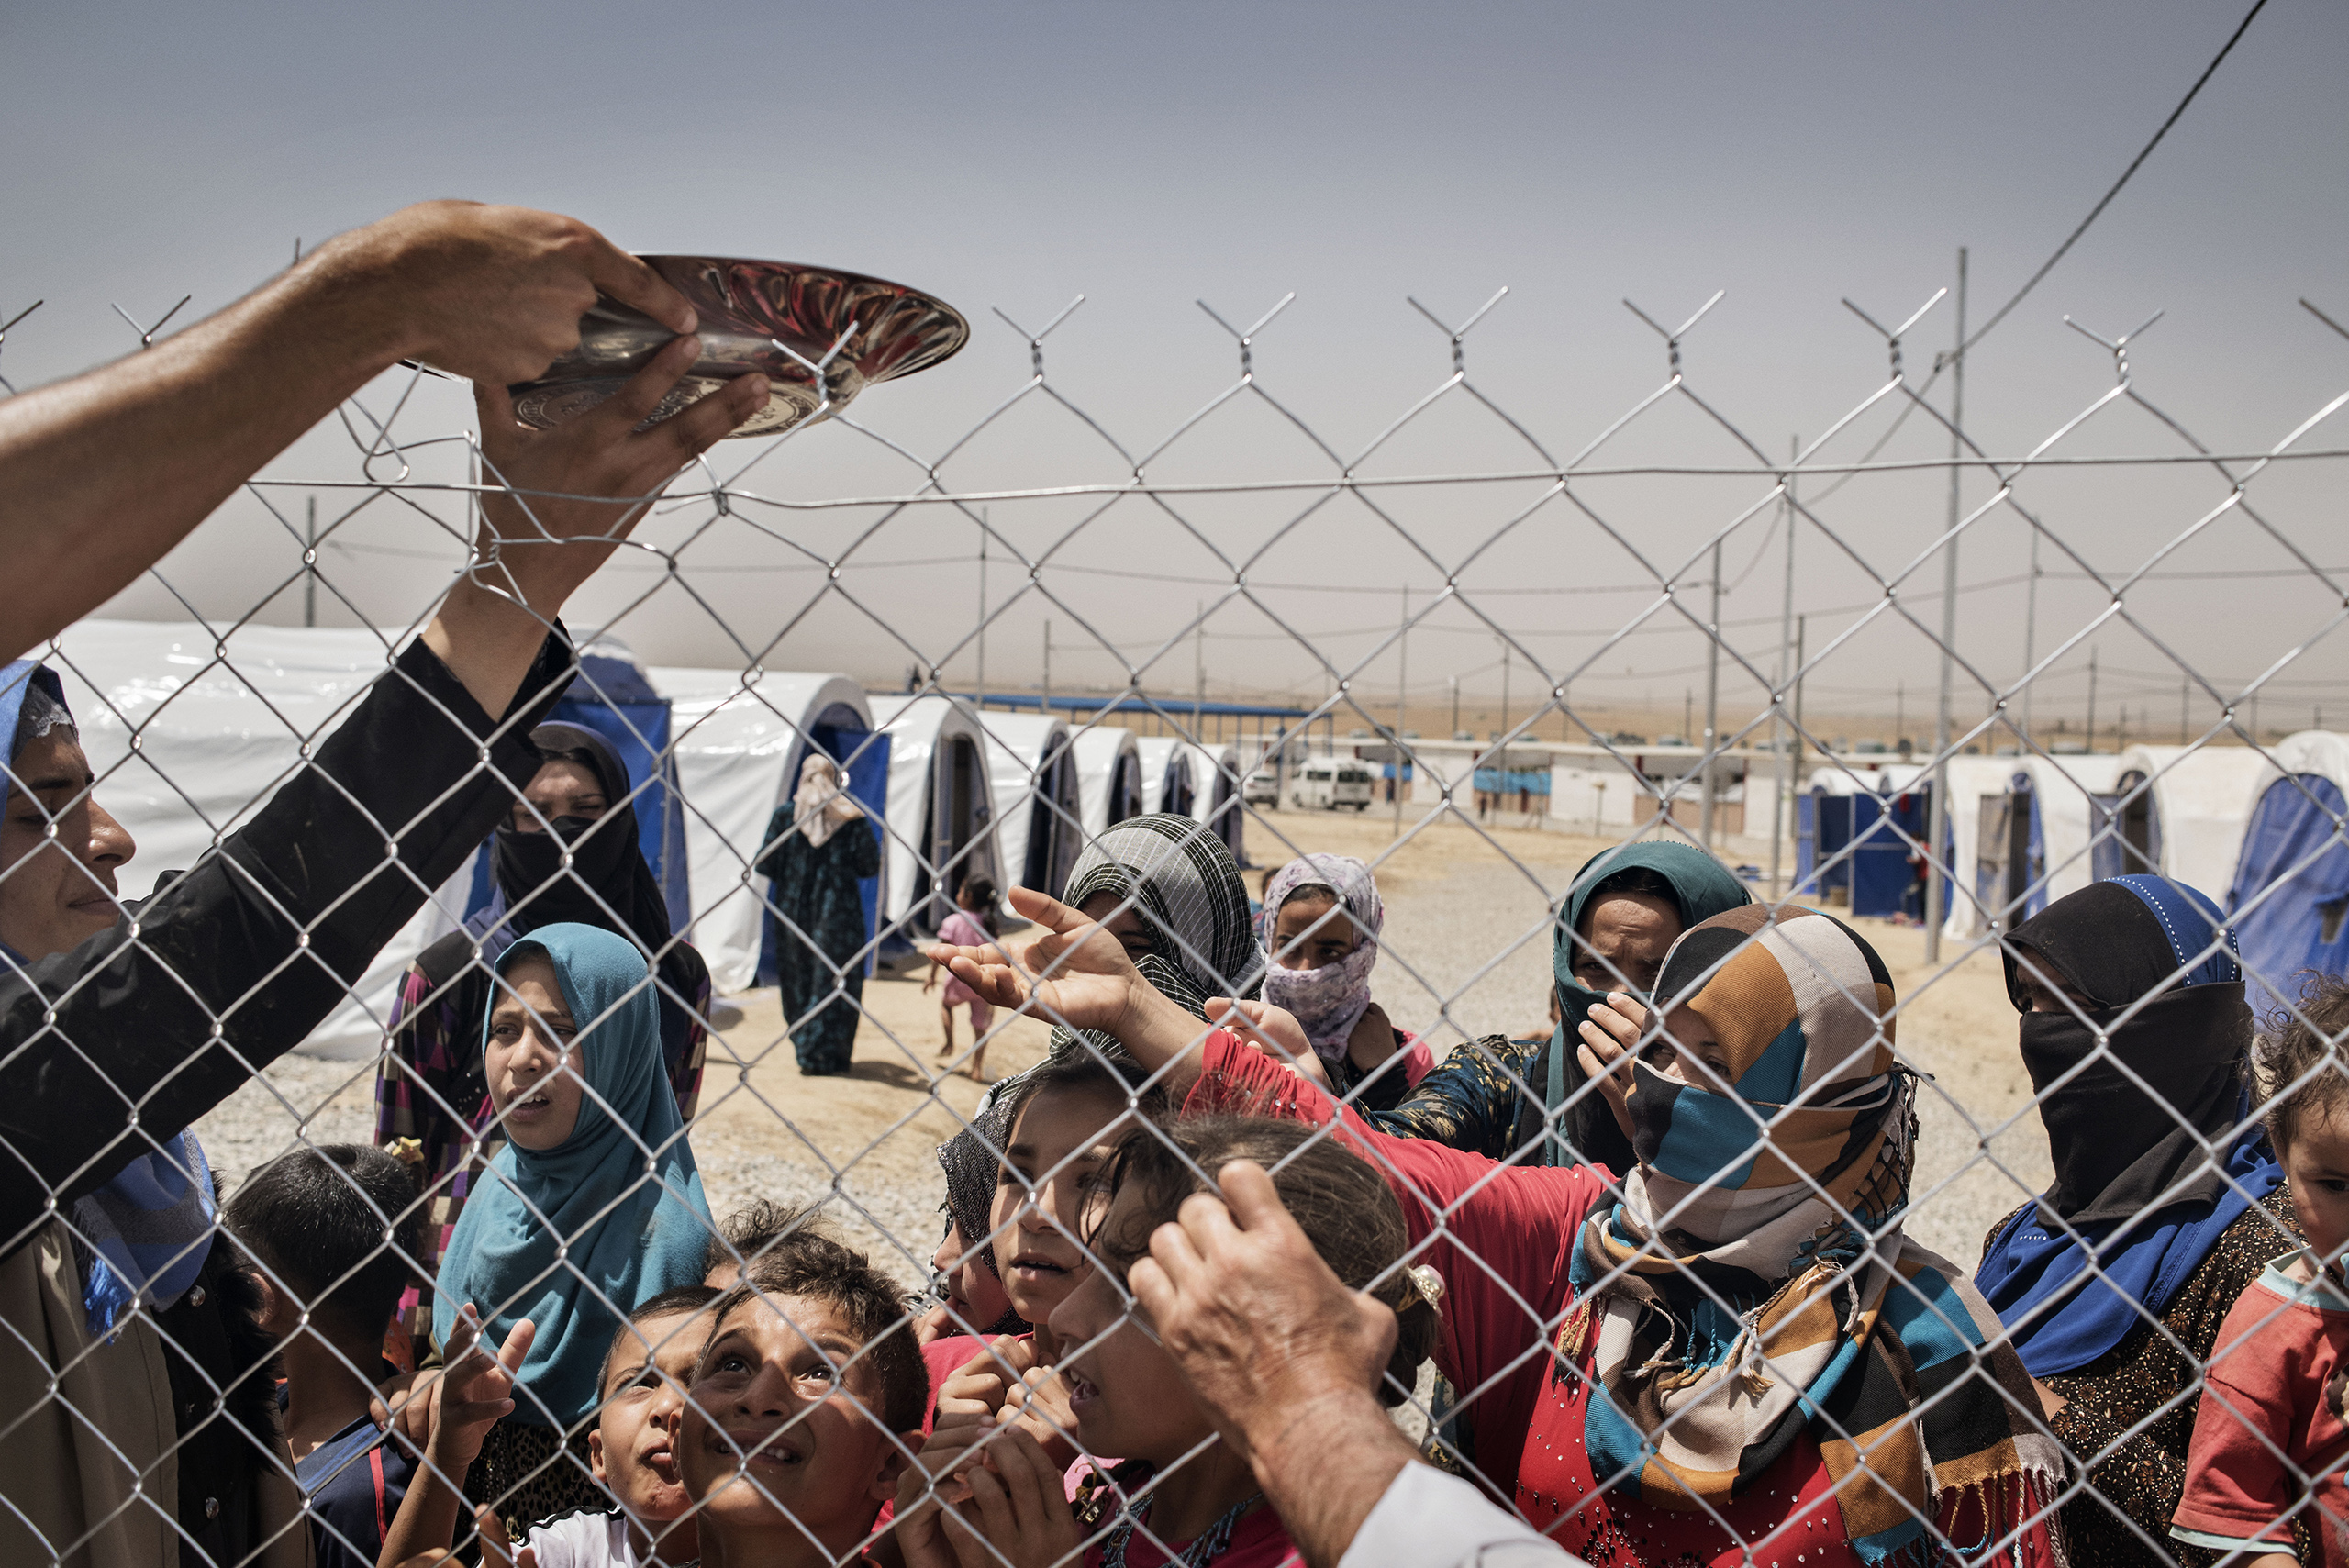 Displaced people stand in front of a fence in a camp near the Iraqi town of Makhmour, in northern Iraq, May 13, 2016. The United Nations said in April that as many as 30,000 people could be forced to flee instability in the Makhmour area, as the Iraqi military pursues an offensive against Islamic State militants in the district. (Yuri Kozyrev—Noor for TIME)